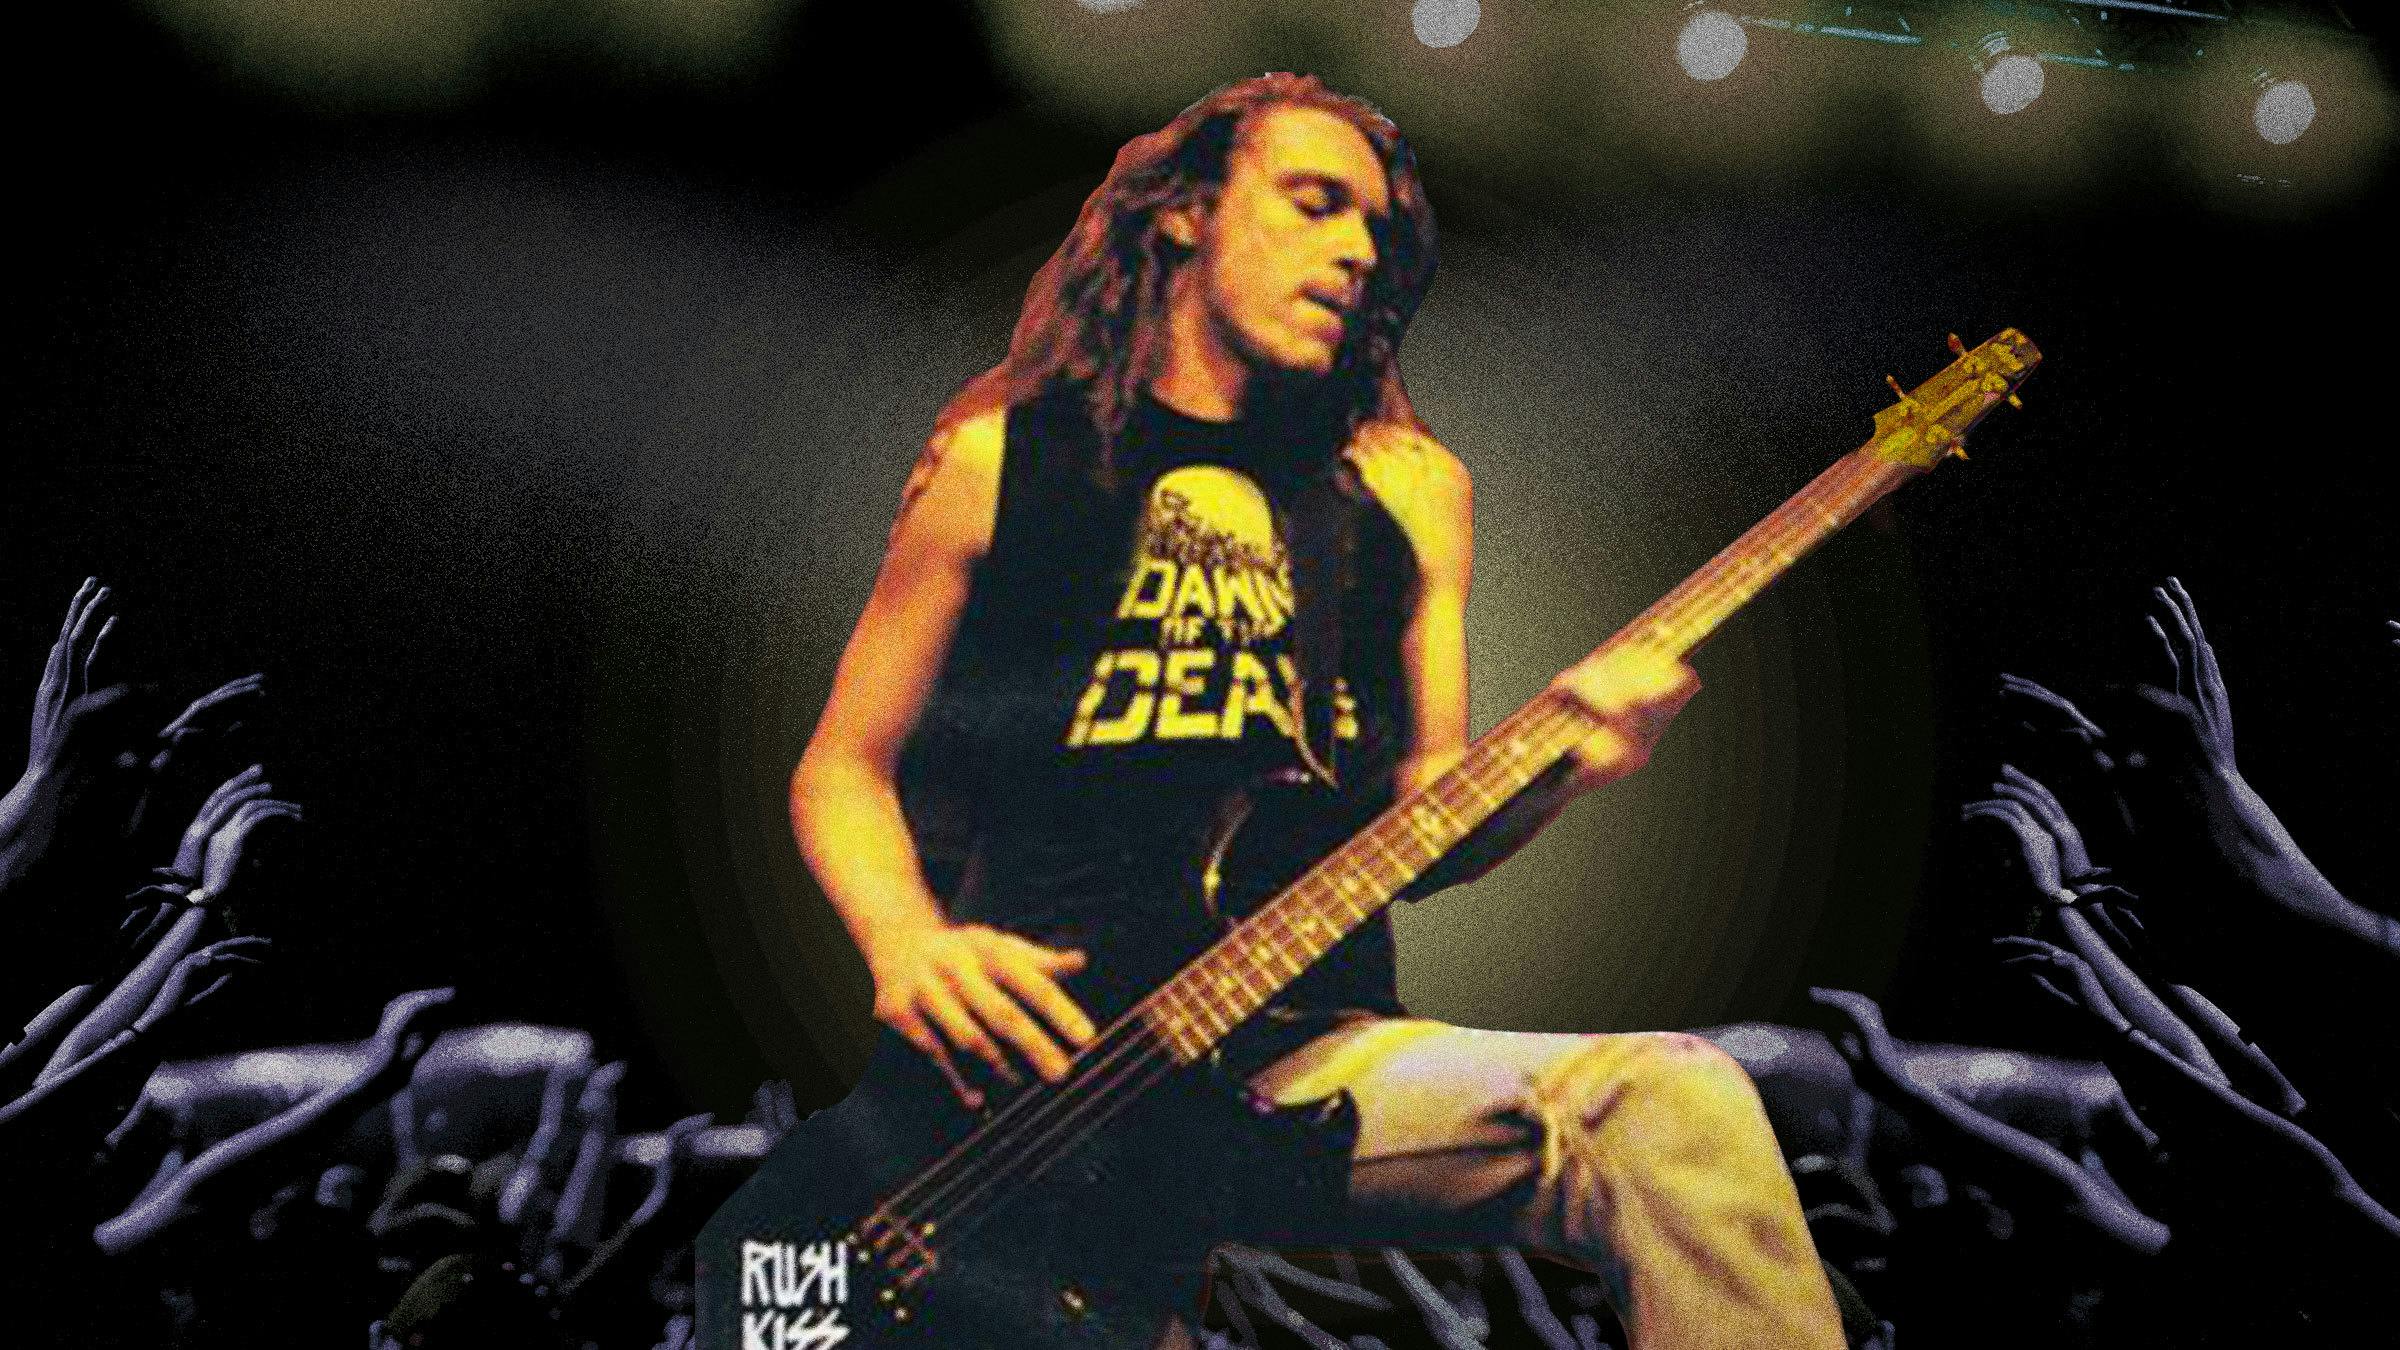 Indispensable Hero: Why I will always love Cliff Burton